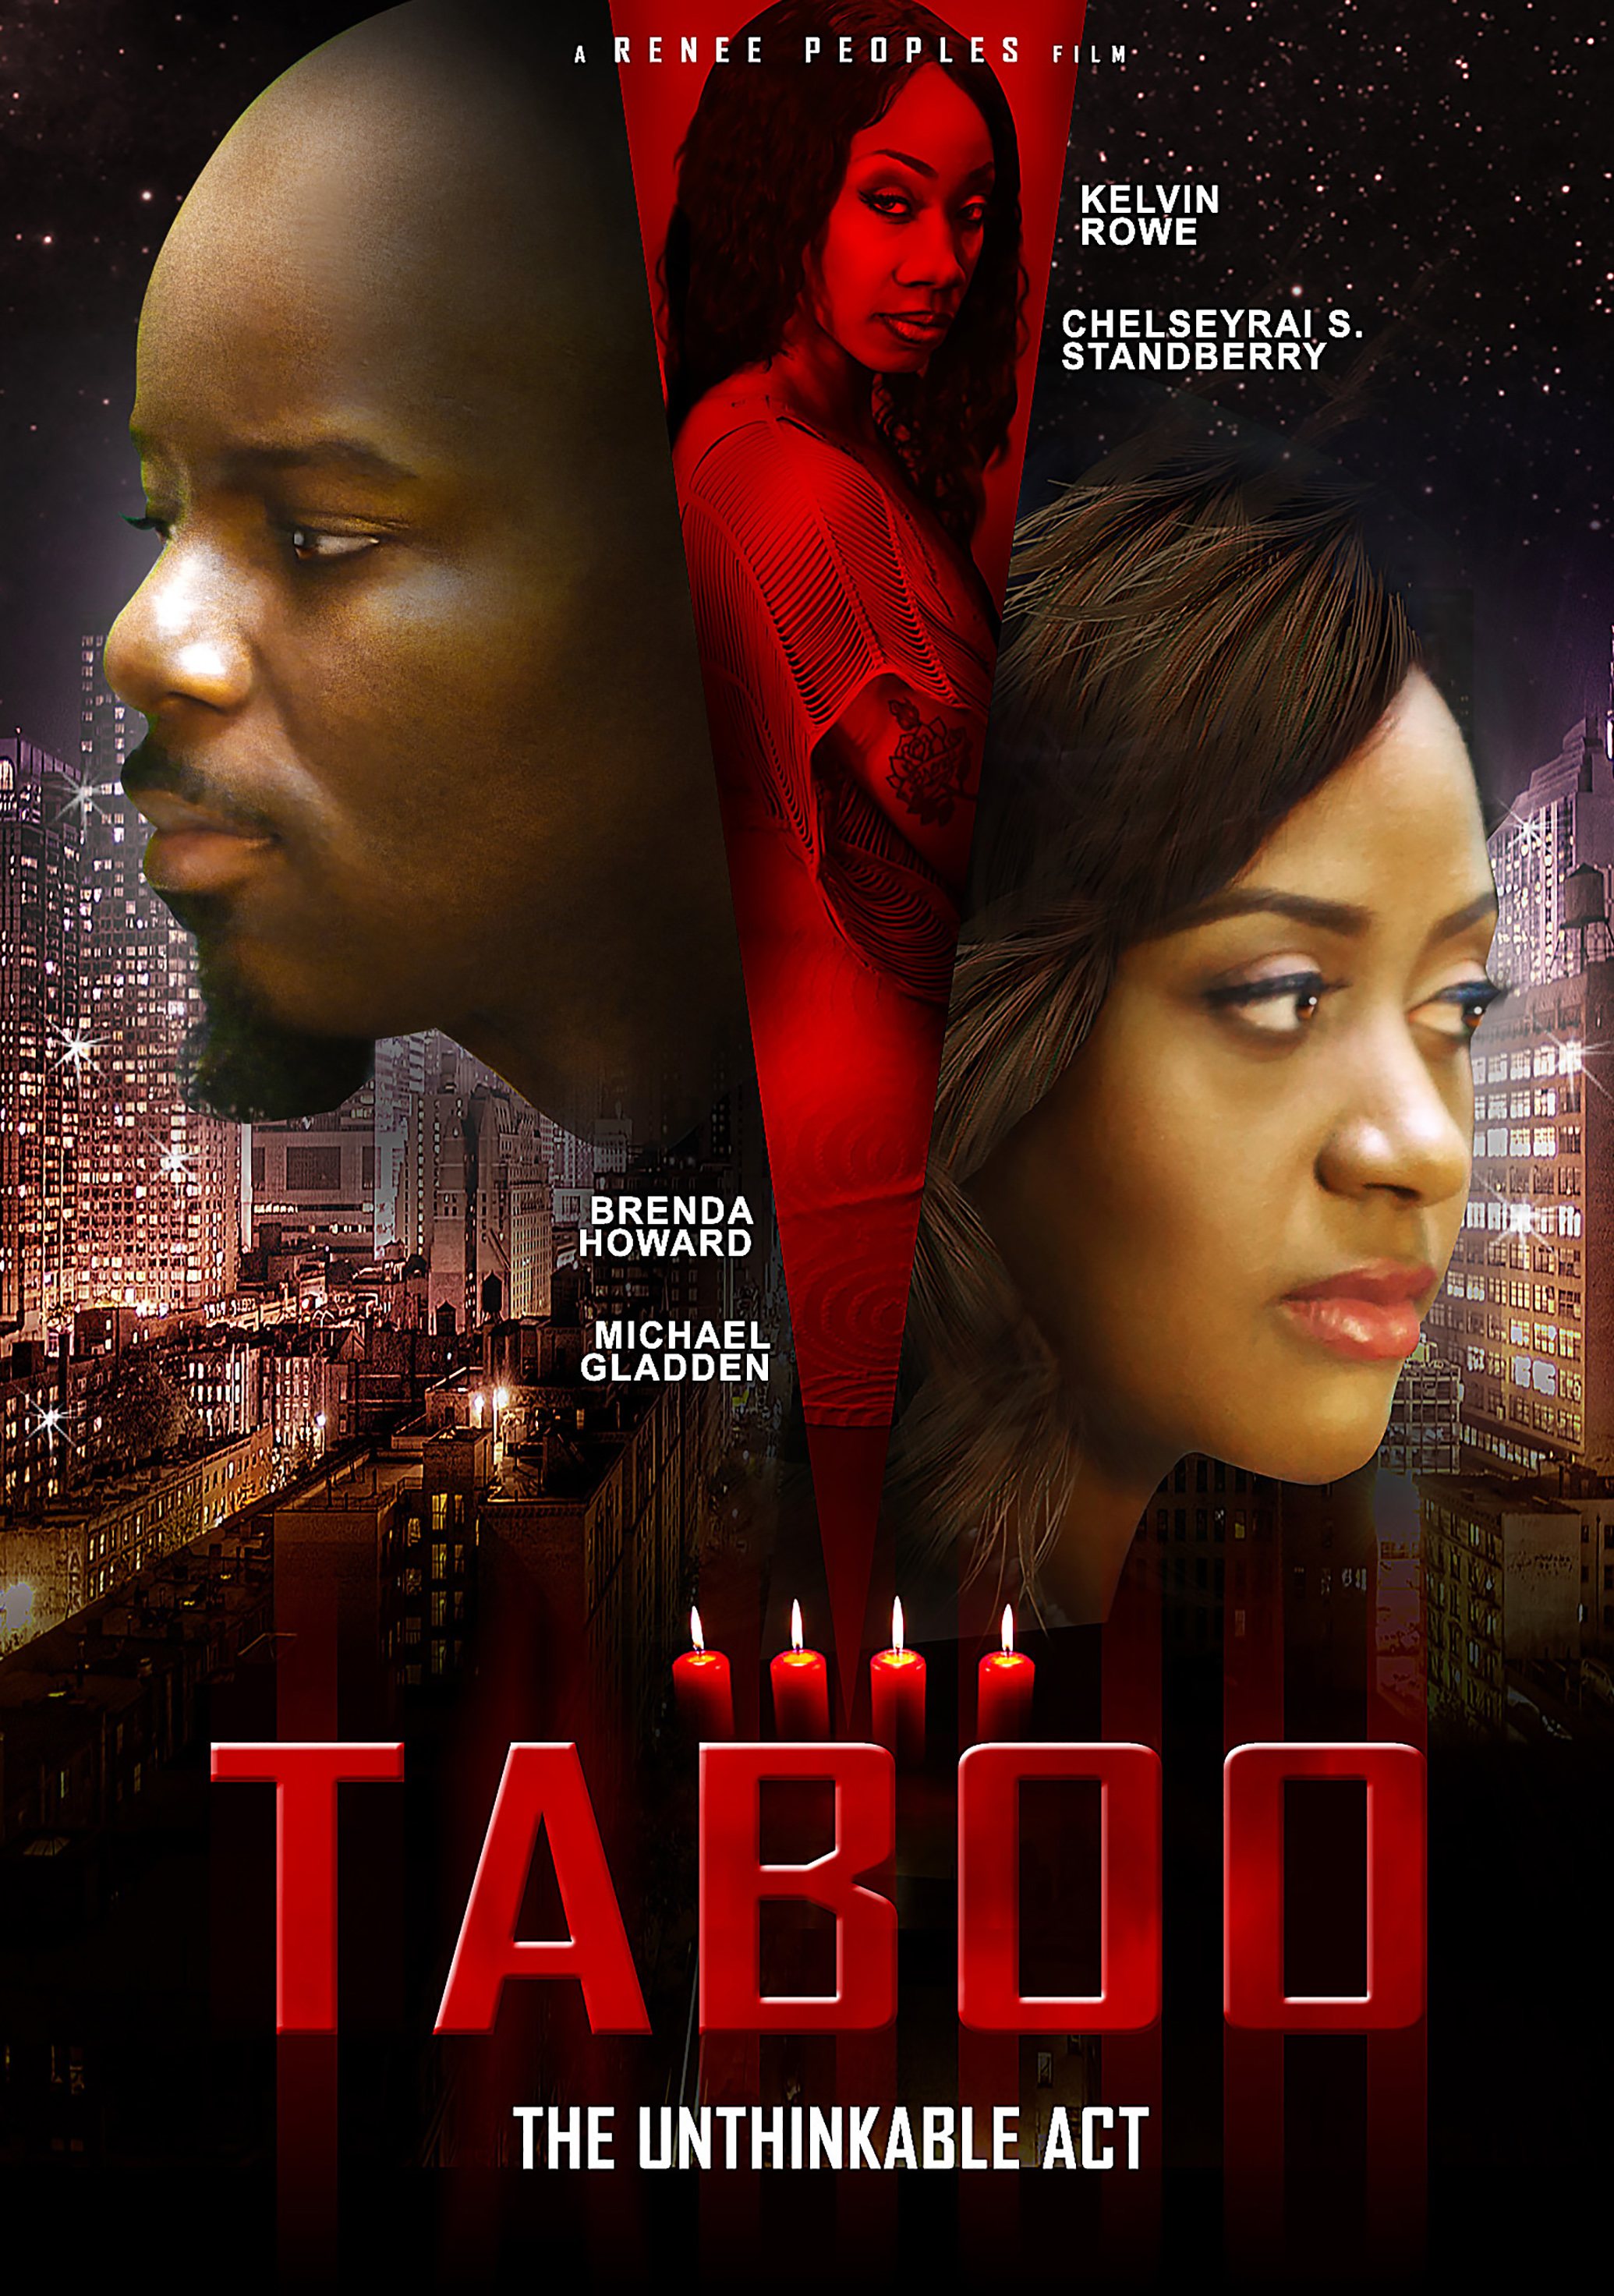 Taboo (2016) Thriller, Directed By Bobby Peoples and Renee Peoples